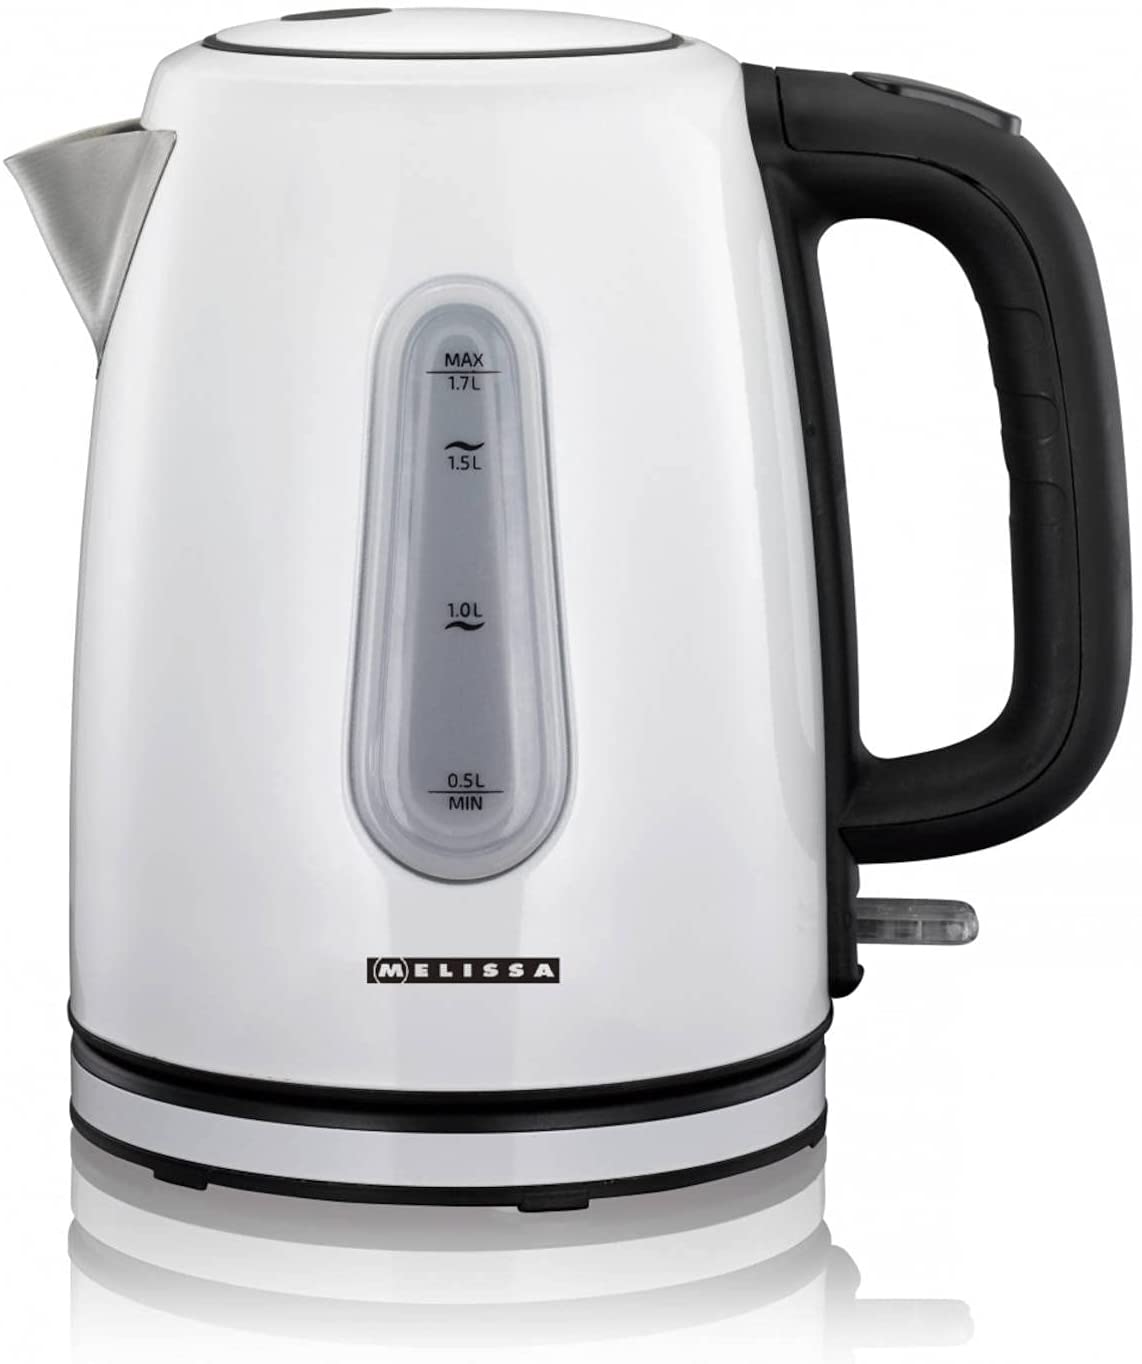 Melissa 16130271 Kettle 1.7 Litres 2200 Watt with Concealed Heating Element Made of Stainless Steel Colour: White